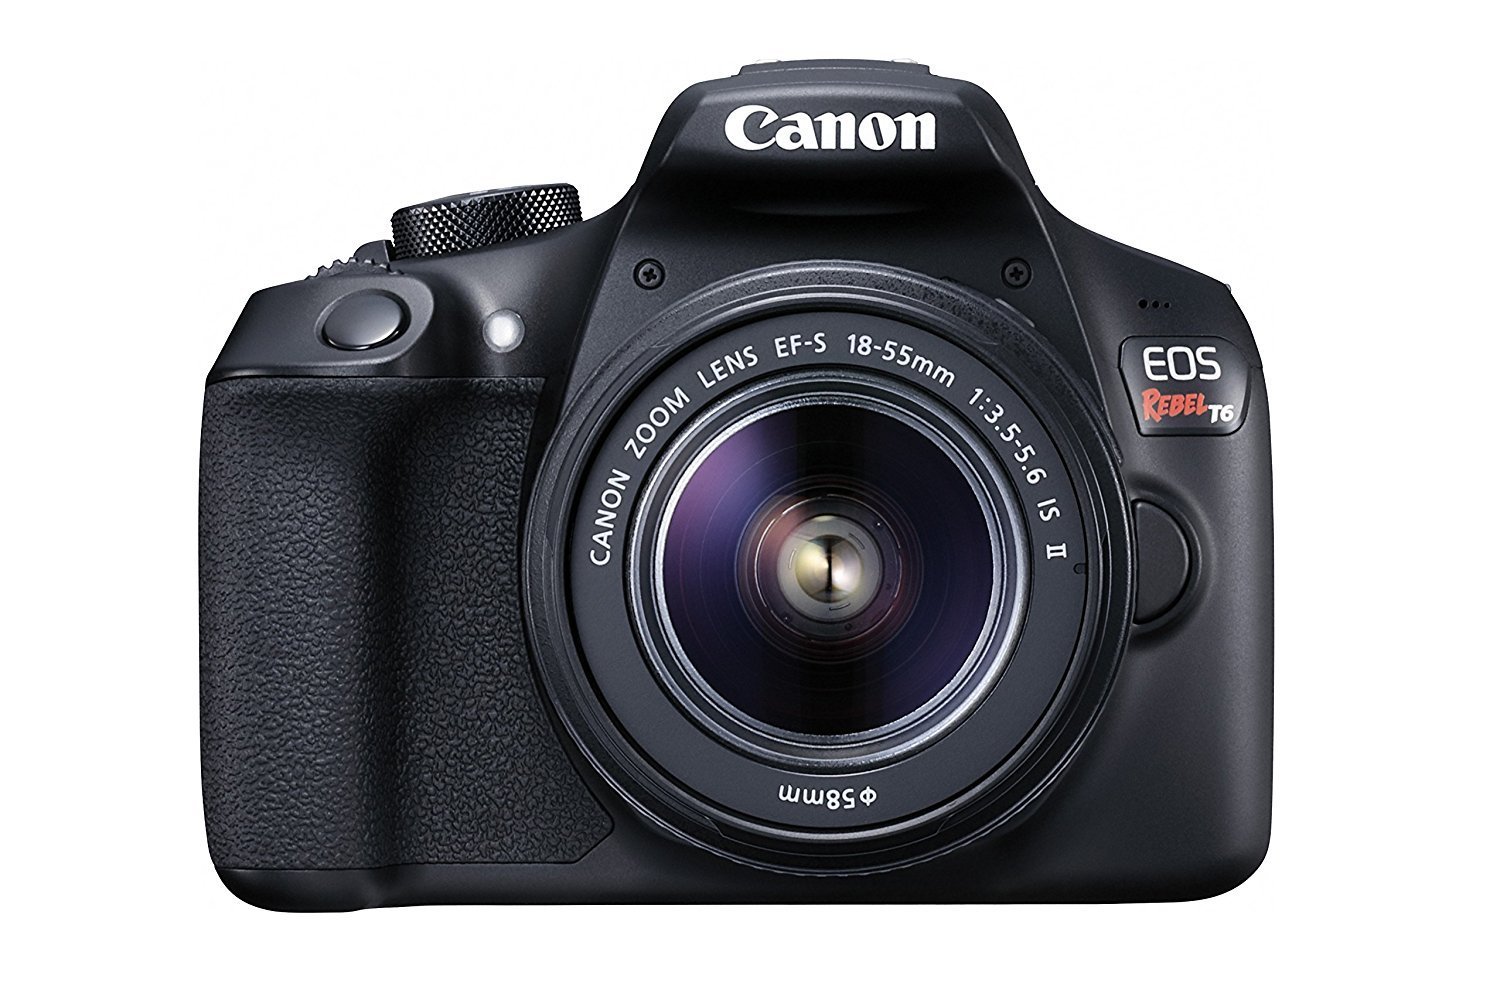 Book Cover Canon EOS Rebel T6 Digital SLR Camera Kit with EF-S 18-55mm f/3.5-5.6 is II Lens, Built-in WiFi and NFC - Black (US Model)